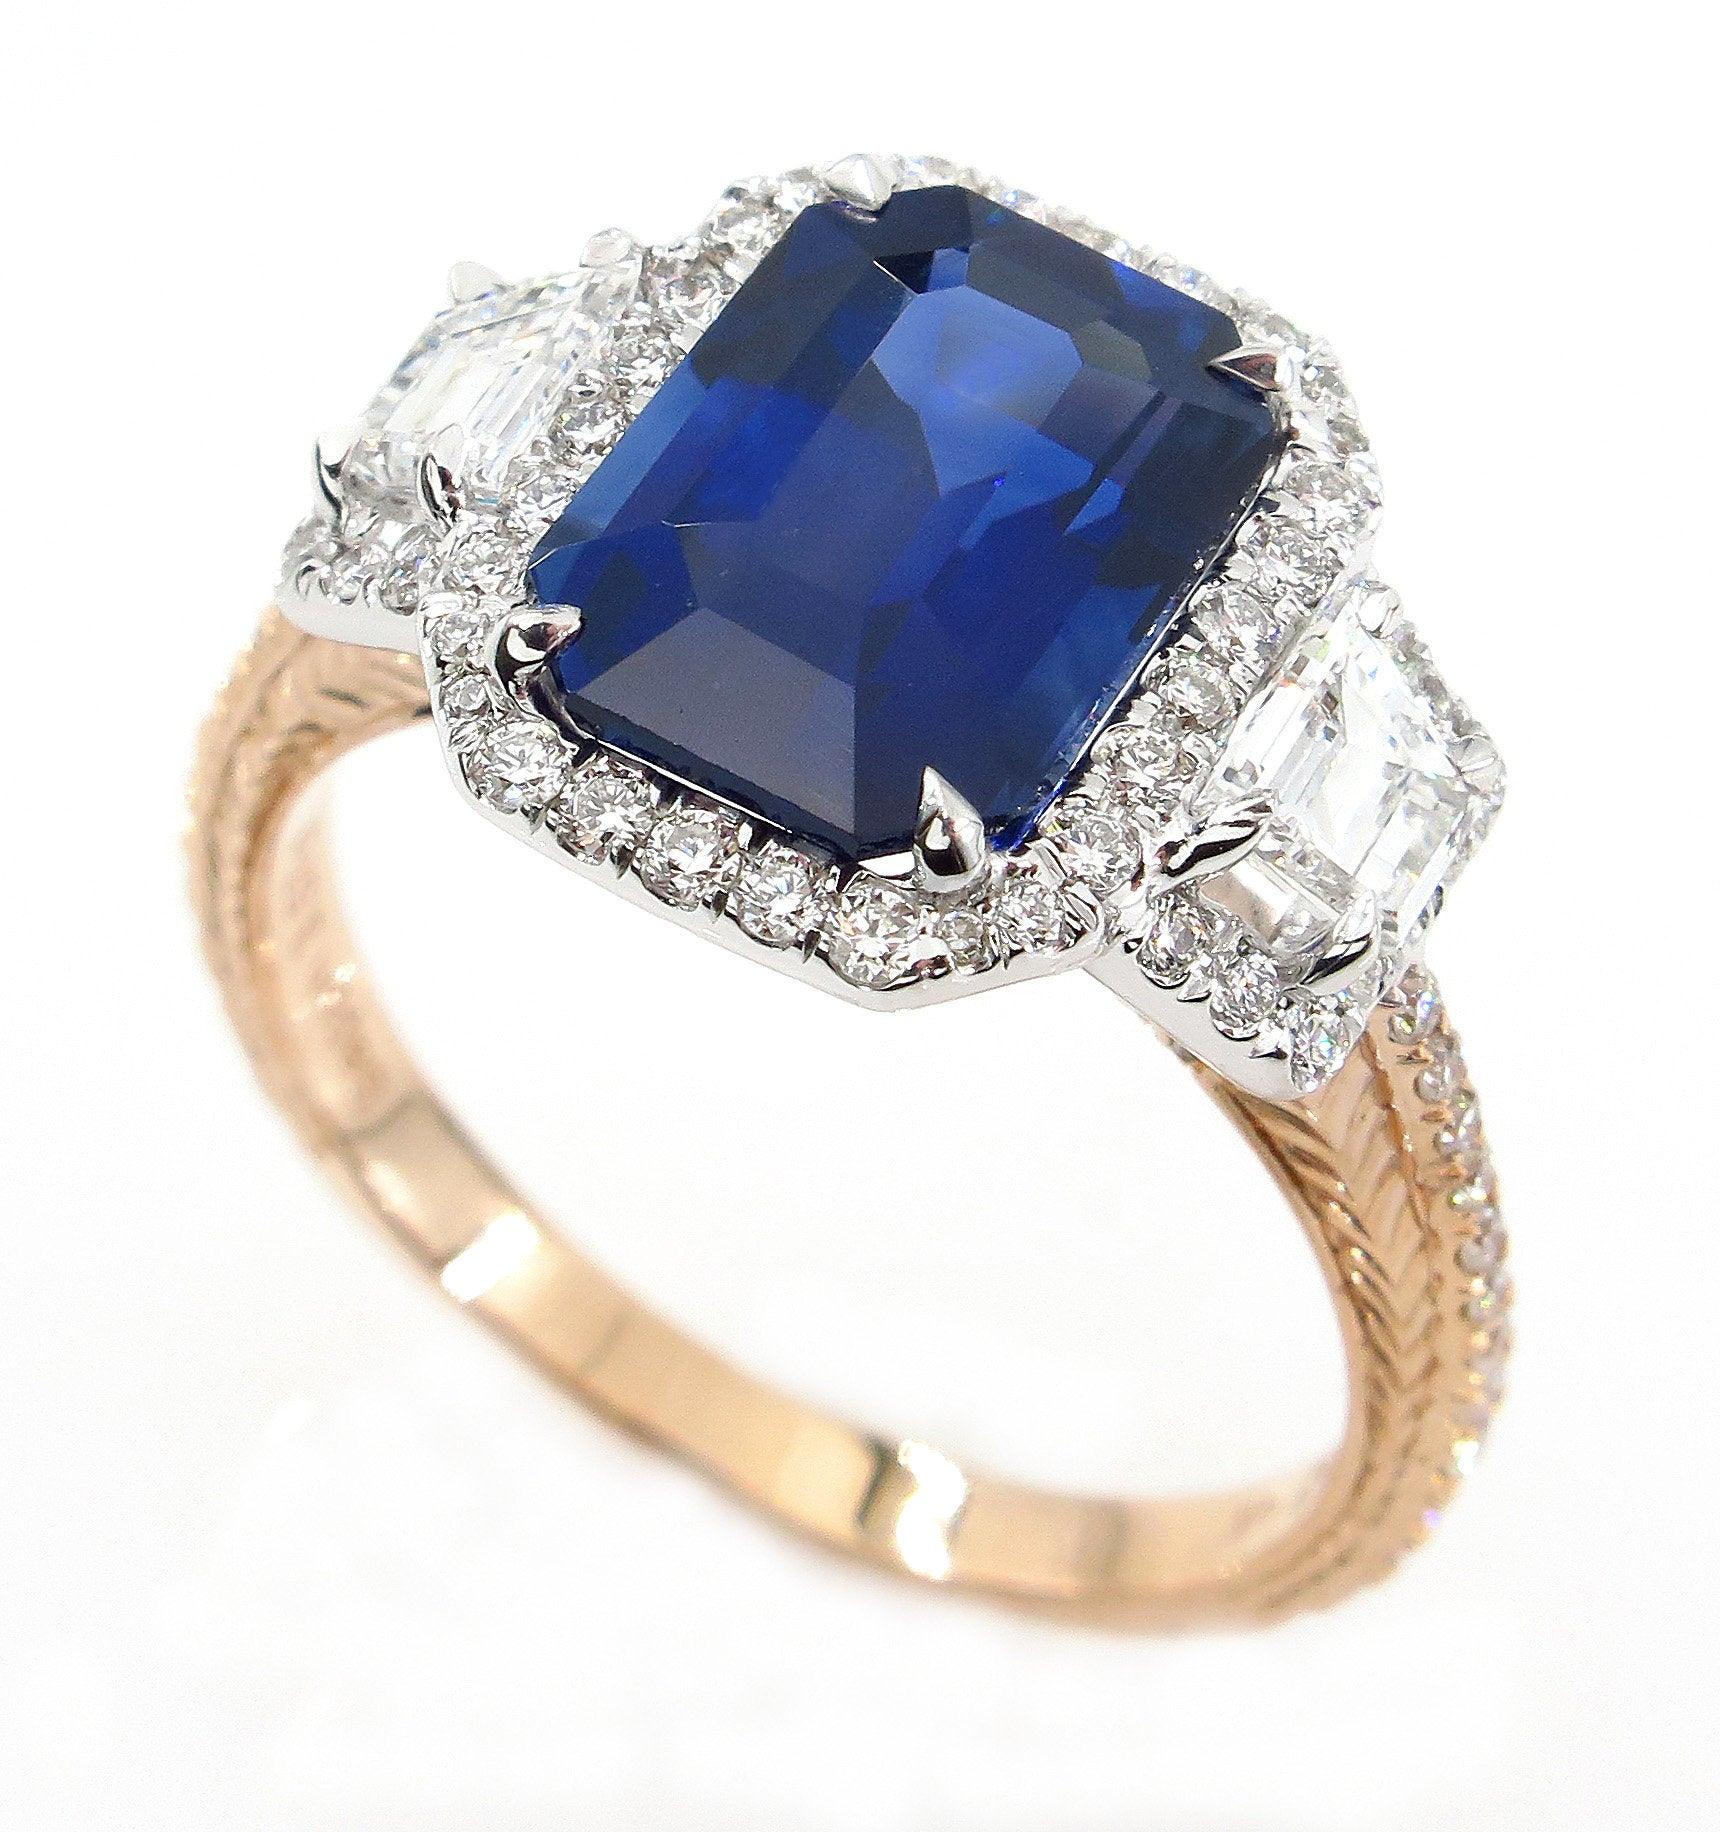 A SUPER fine Ring features a Gorgeous gem : 3.57 carat Natural CEYLON Emerald Cut Deep Blue Sapphire Measuring 9.89 x 7.09 x 5.22mm, bearing a recent GIA Certificate stating: Natural Sapphire, Clear with no visible imperfections and minor treatment